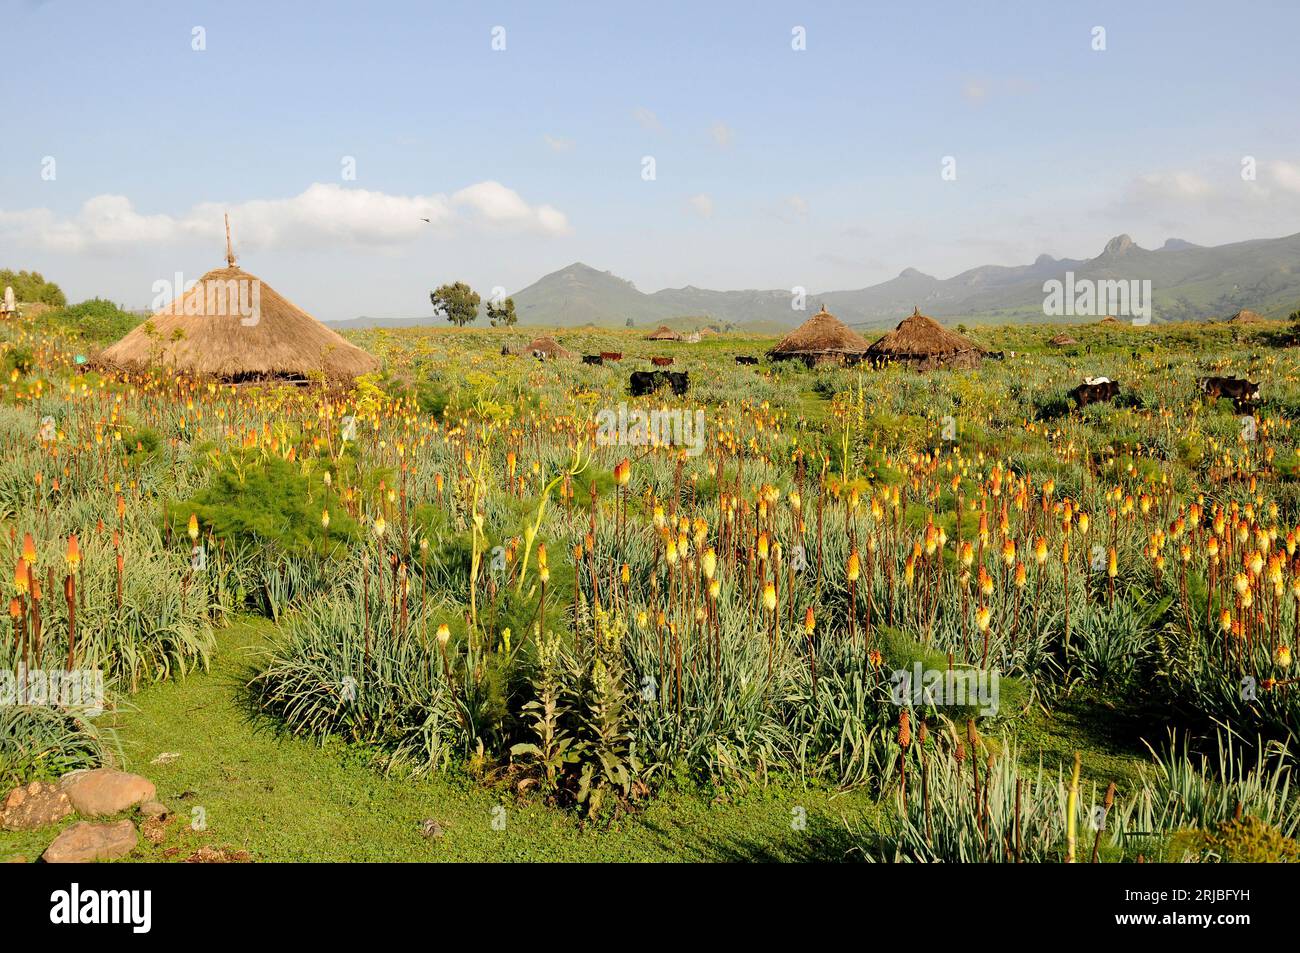 Huts and cattle in a meadow covered by red hot poker (Kniphofia foliosa). Bale Region, Oromia, Ethiopia. Stock Photo